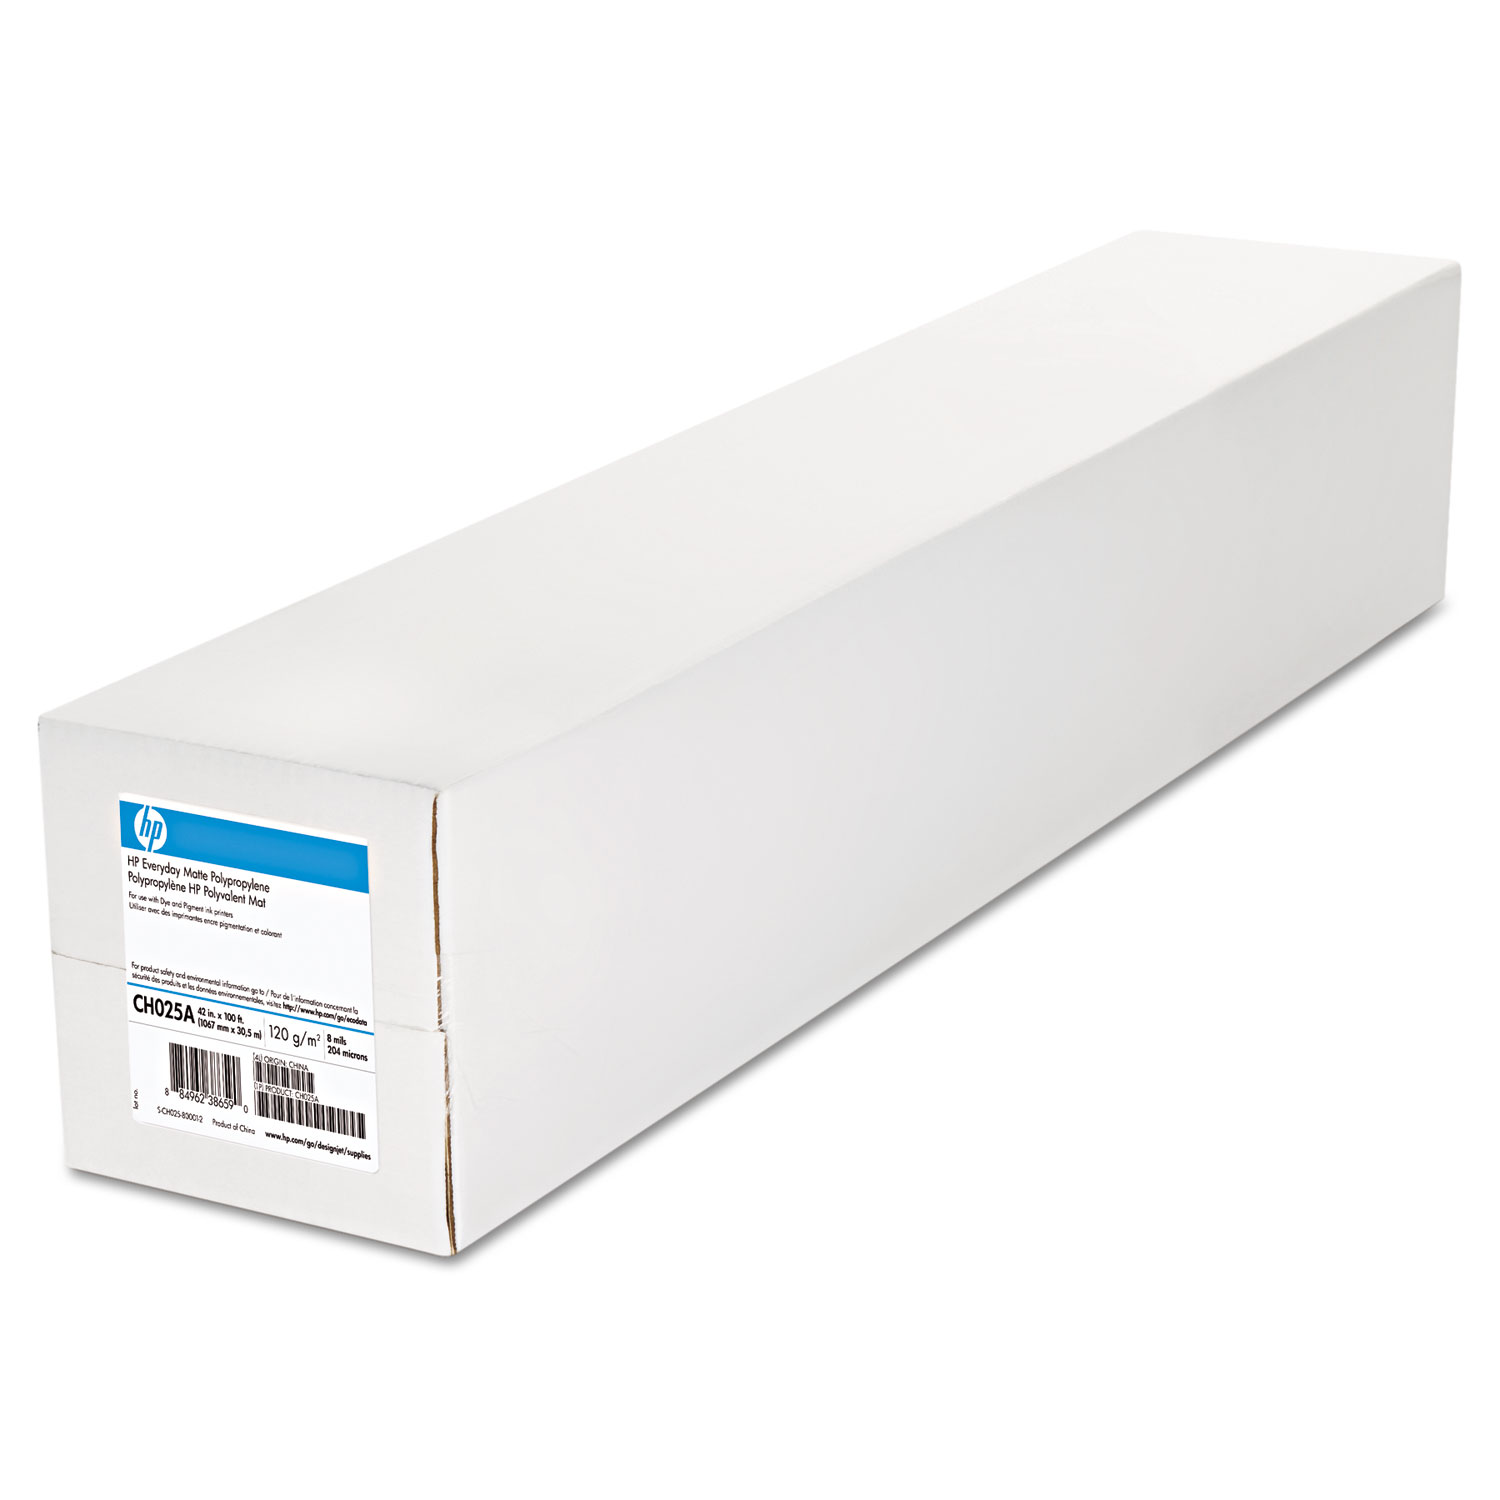  HP CH025A Everyday Matte Polypropylene Roll Film, 2 Core, 8 mil, 42 x 100ft, White, 2/Pack (HEWCH025A) 